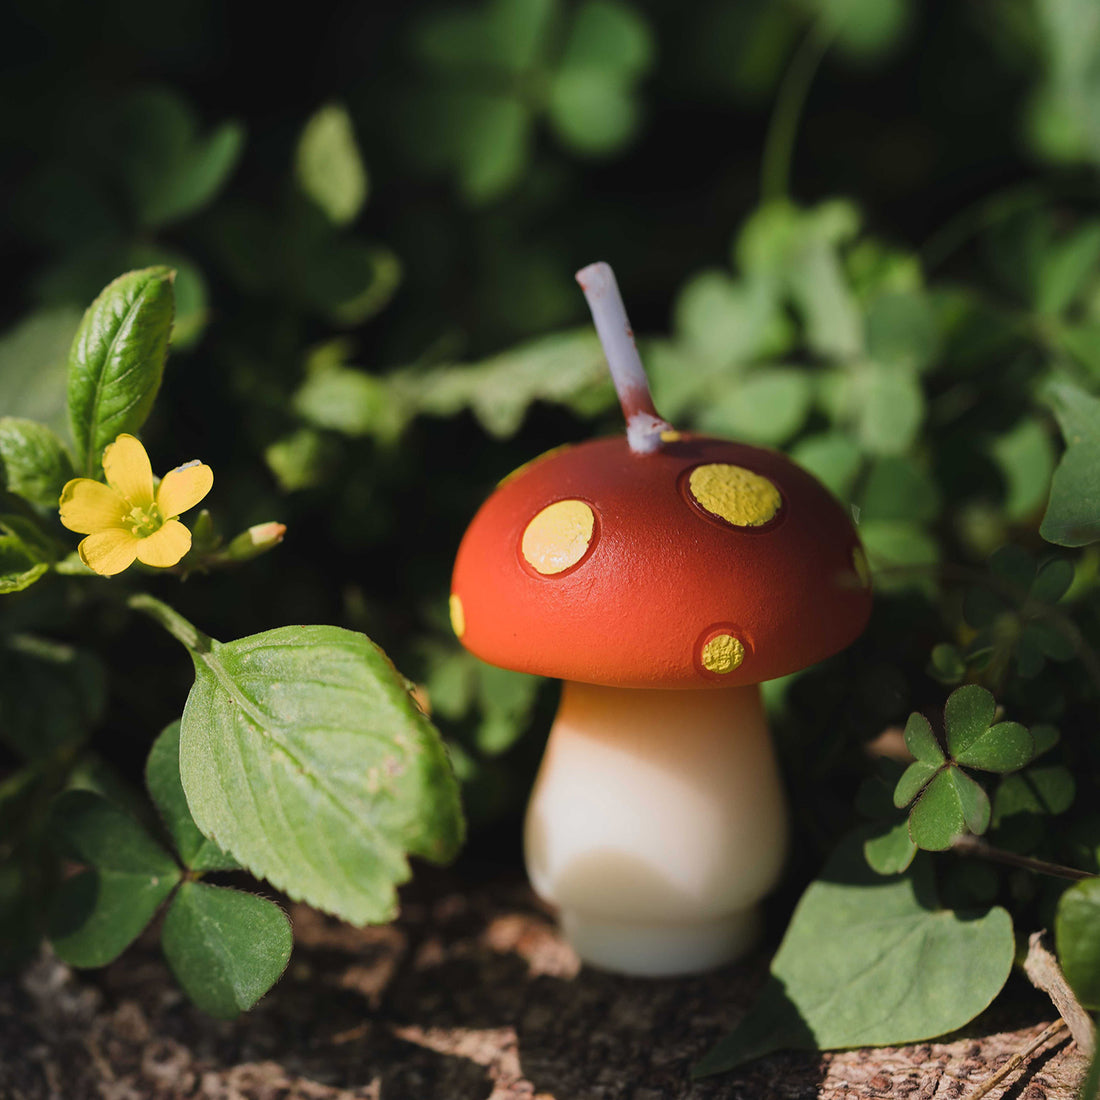 Innovate stylish decoration just like this cute mini mushroom from Southlake Gifts.